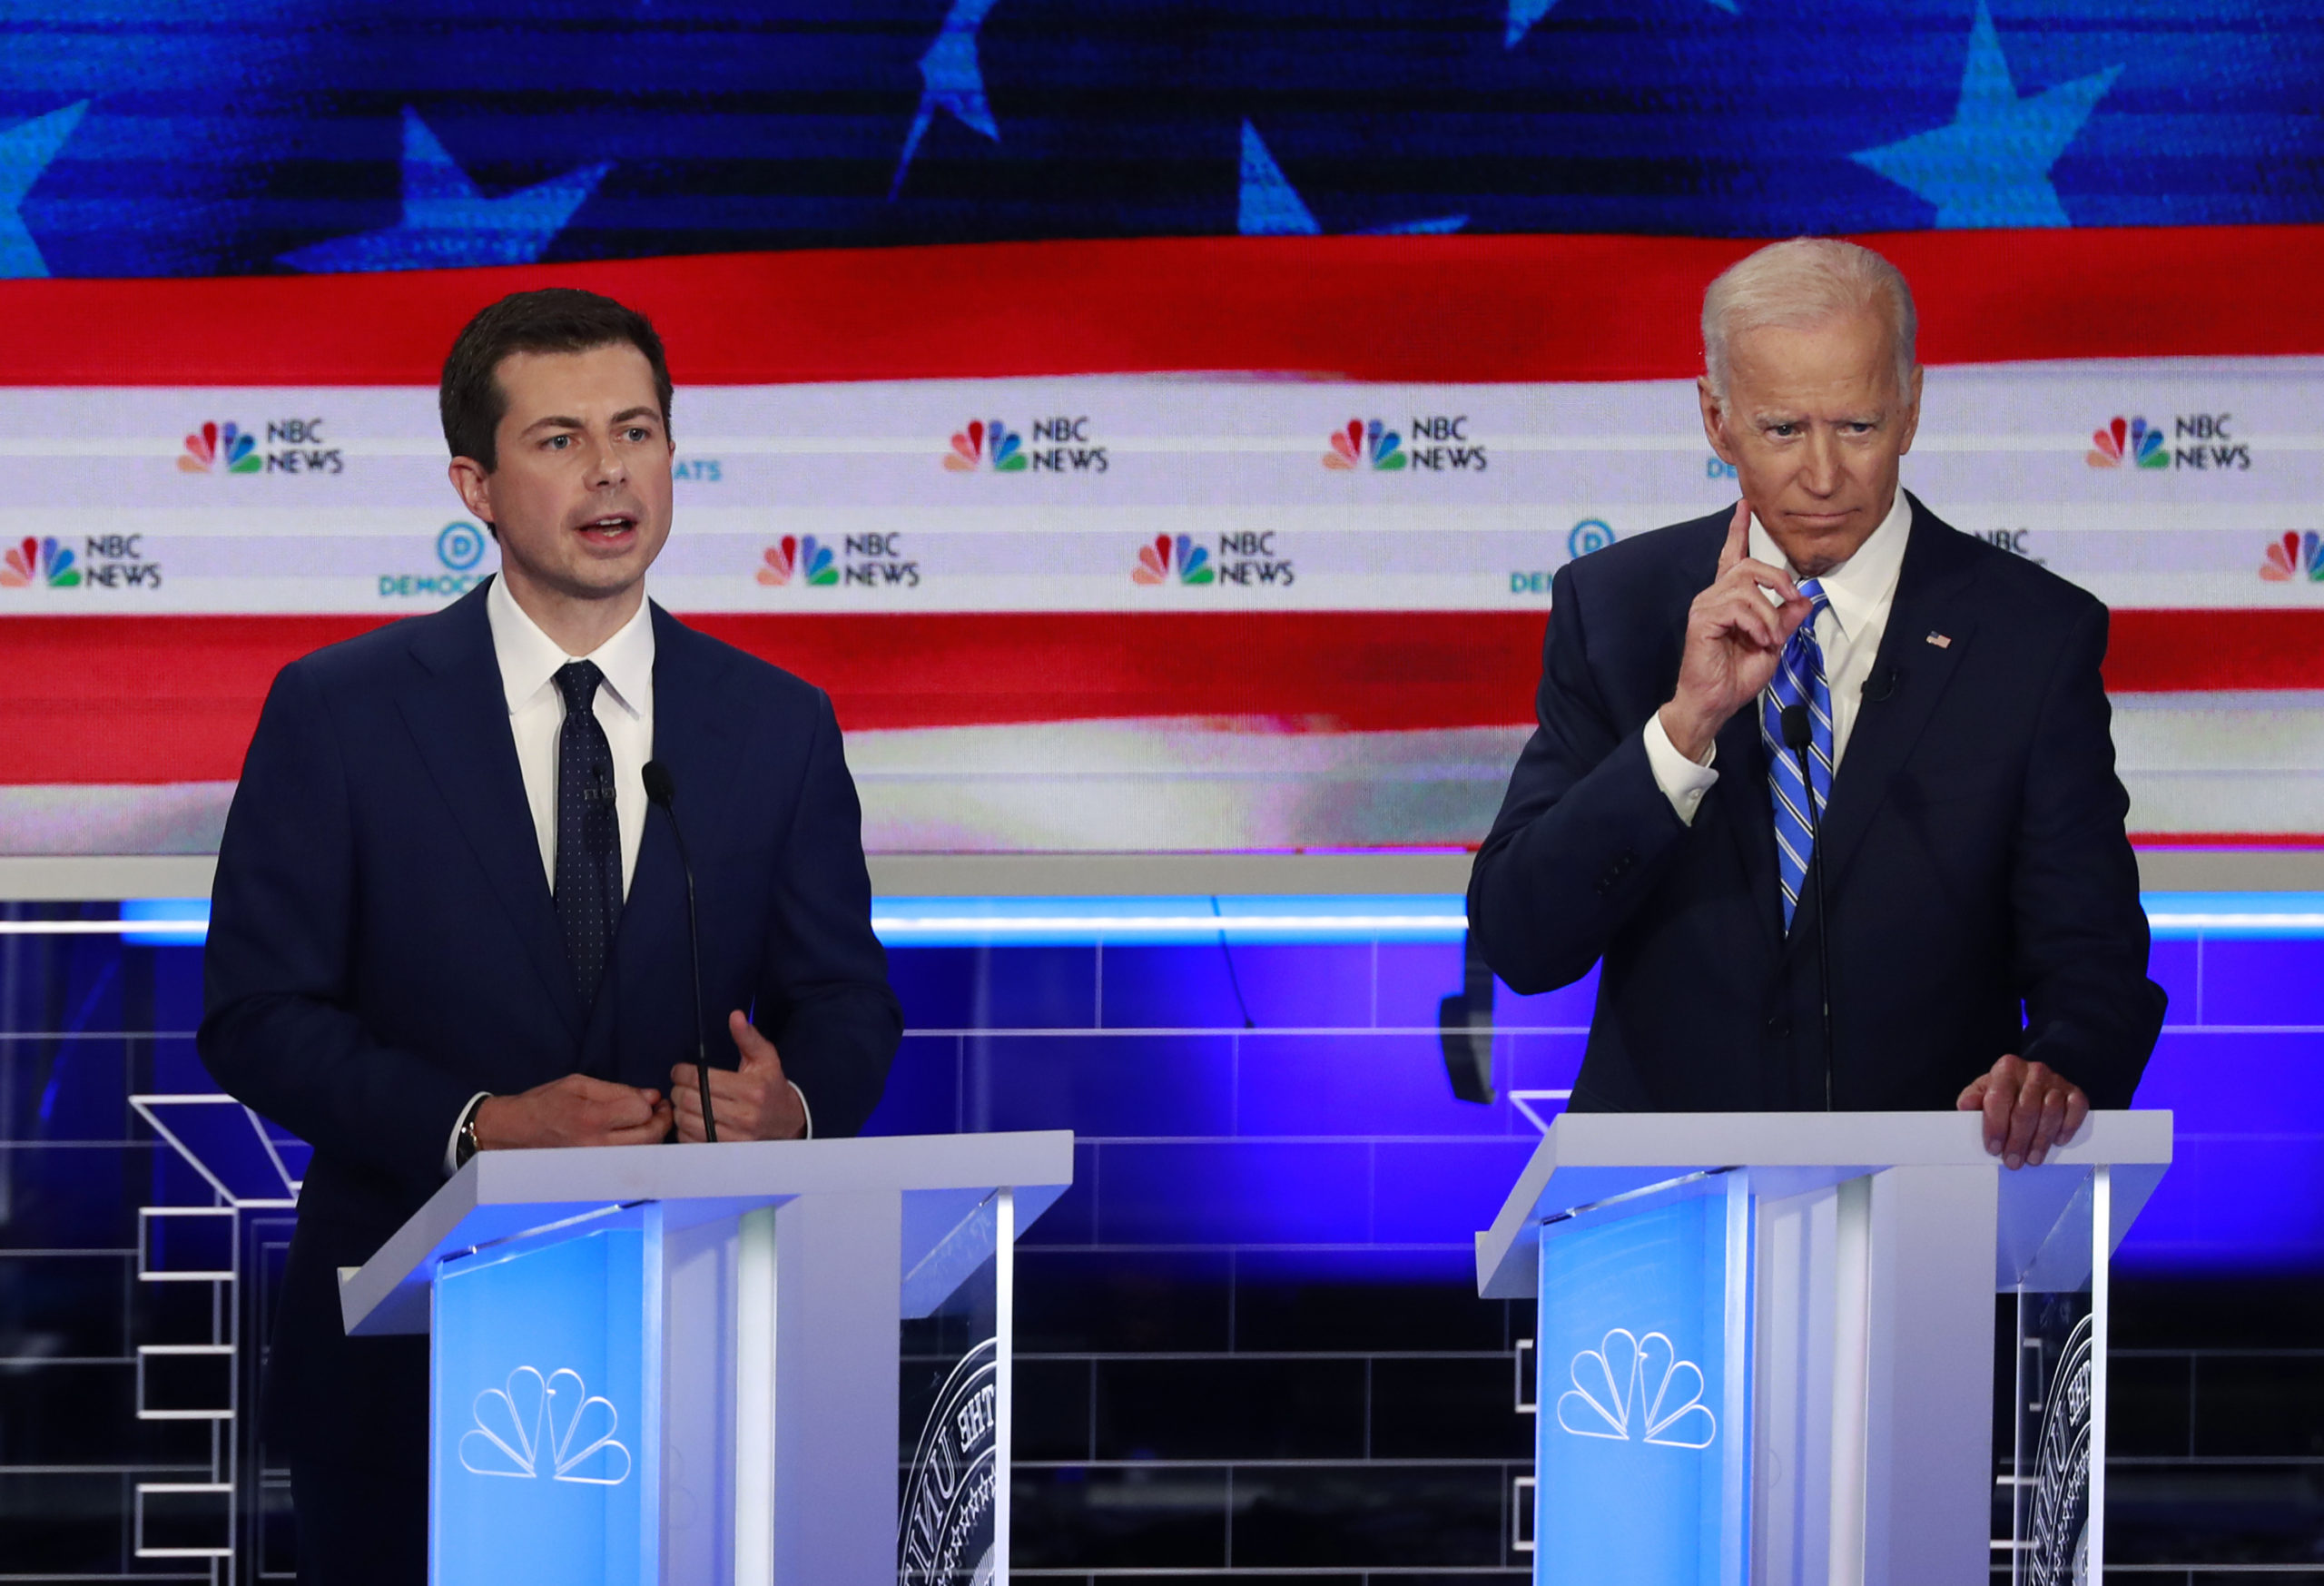 Mayor of South Bend, Ind., Pete Buttigieg, left, and former Vice President Joe Biden during a Democratic primary debate in Miami, Fl.